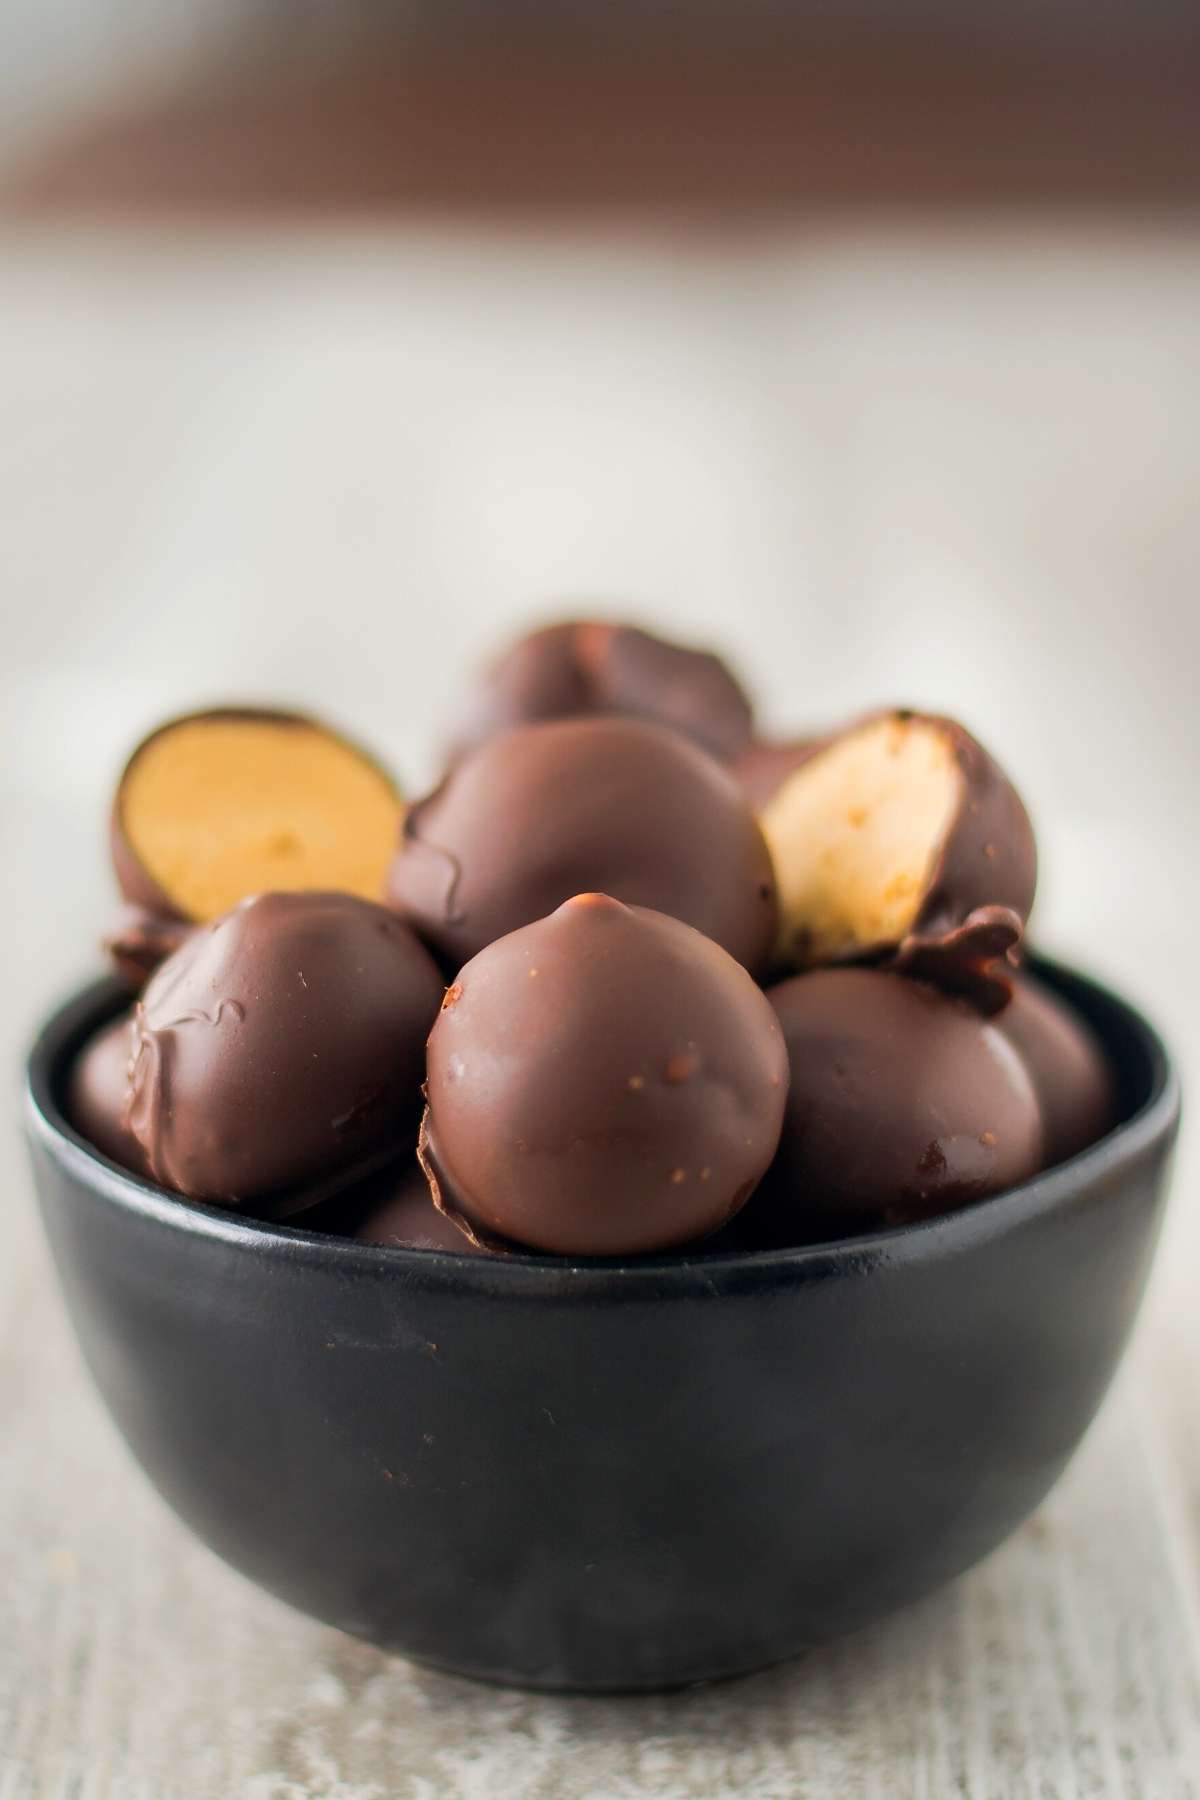 These old-fashioned peanut butter balls are a favorite among both kids and adults. They’re the perfect size to pop in your mouth!